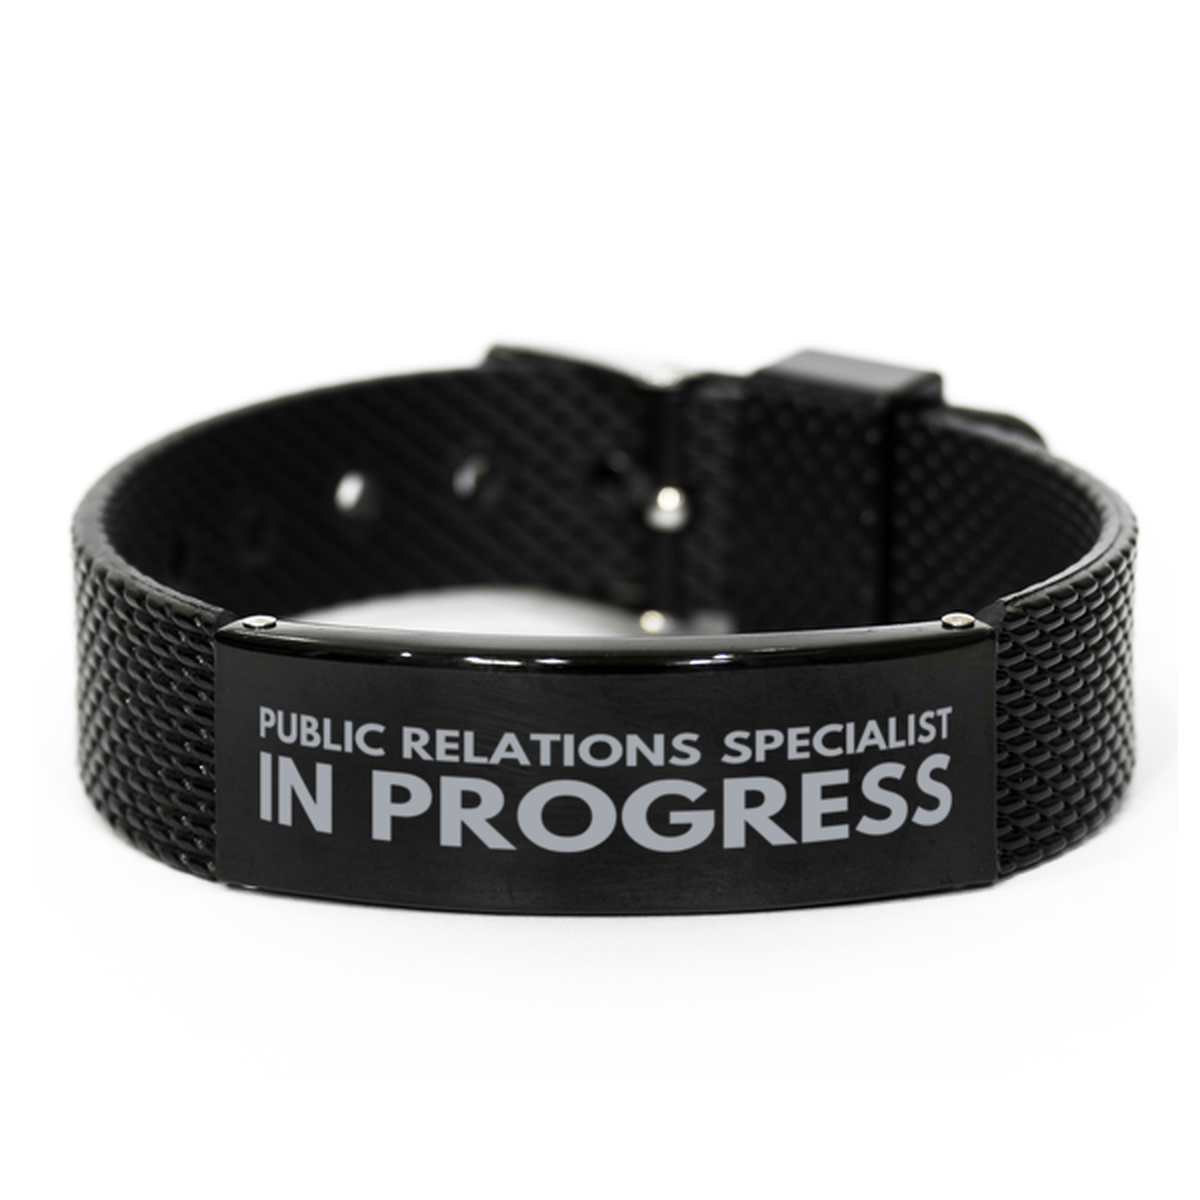 Inspirational Public Relations Specialist Black Shark Mesh Bracelet, Public Relations Specialist In Progress, Best Graduation Gifts for Students